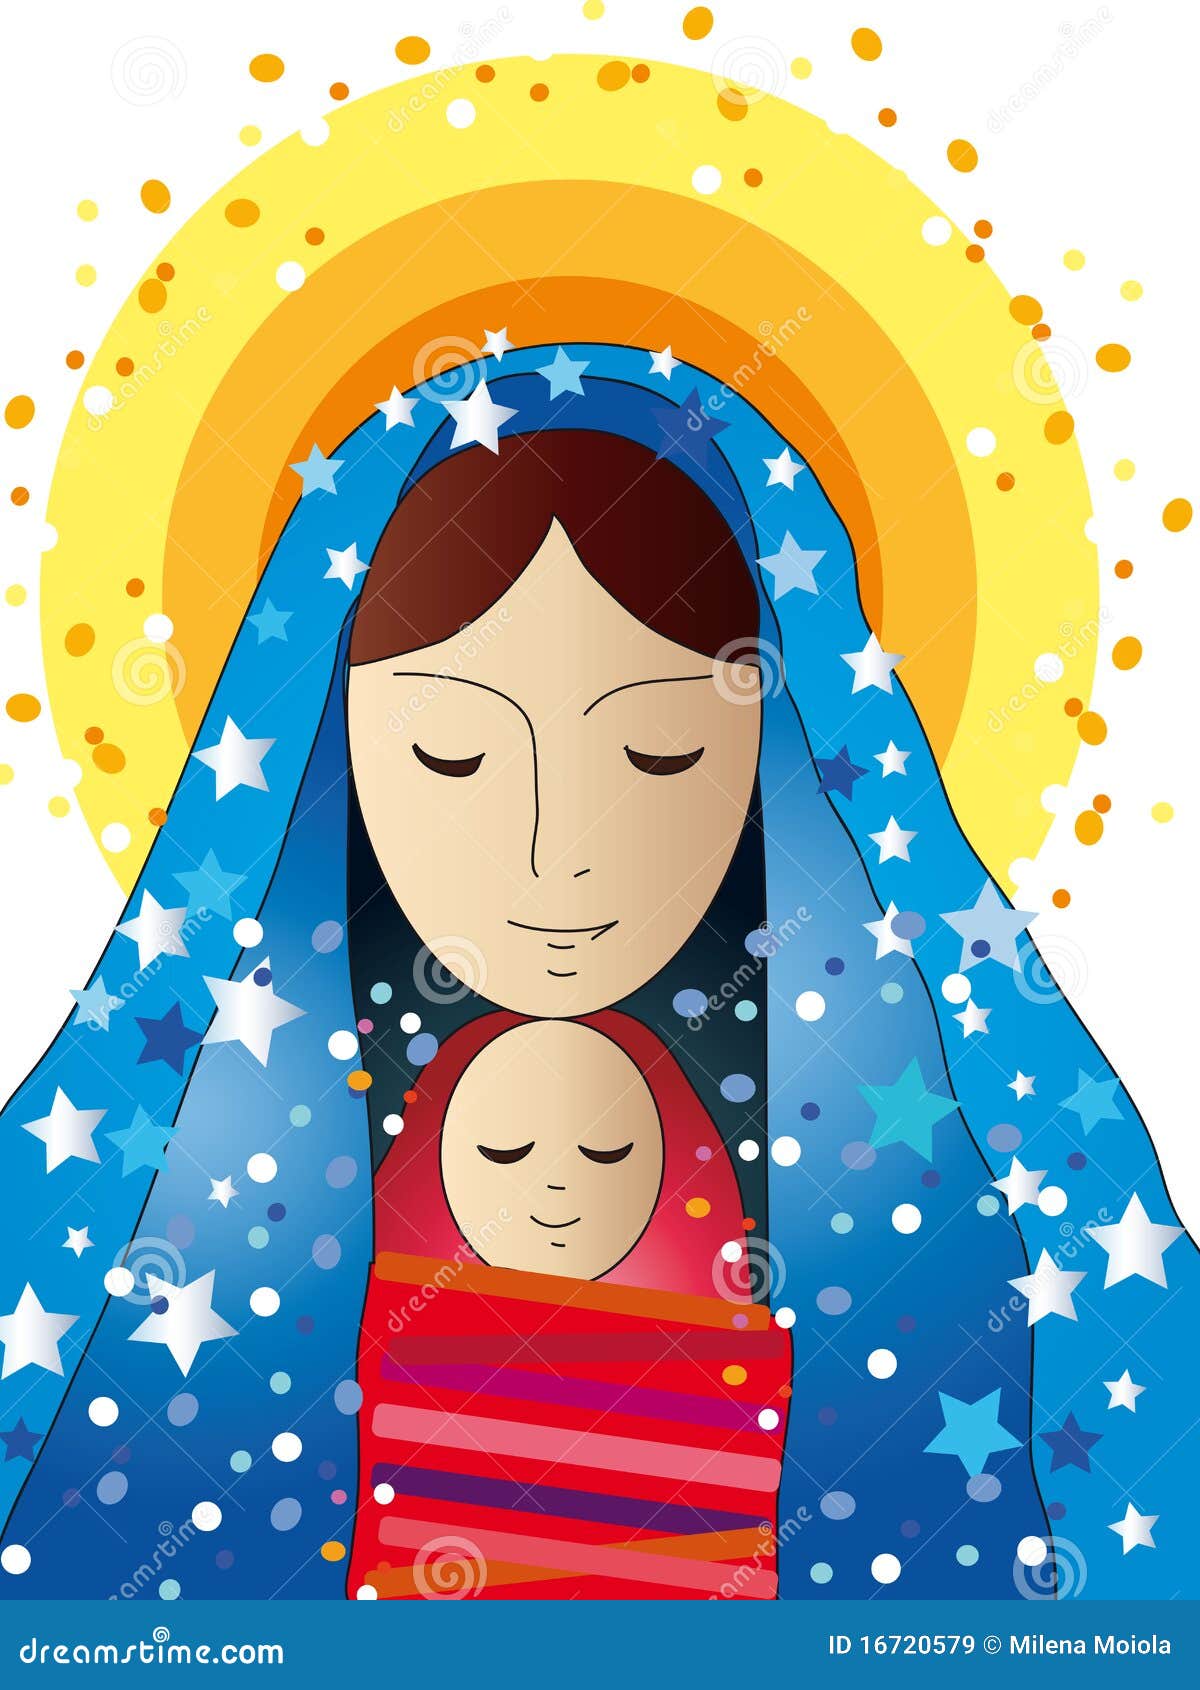 clip art mary mother of jesus - photo #37